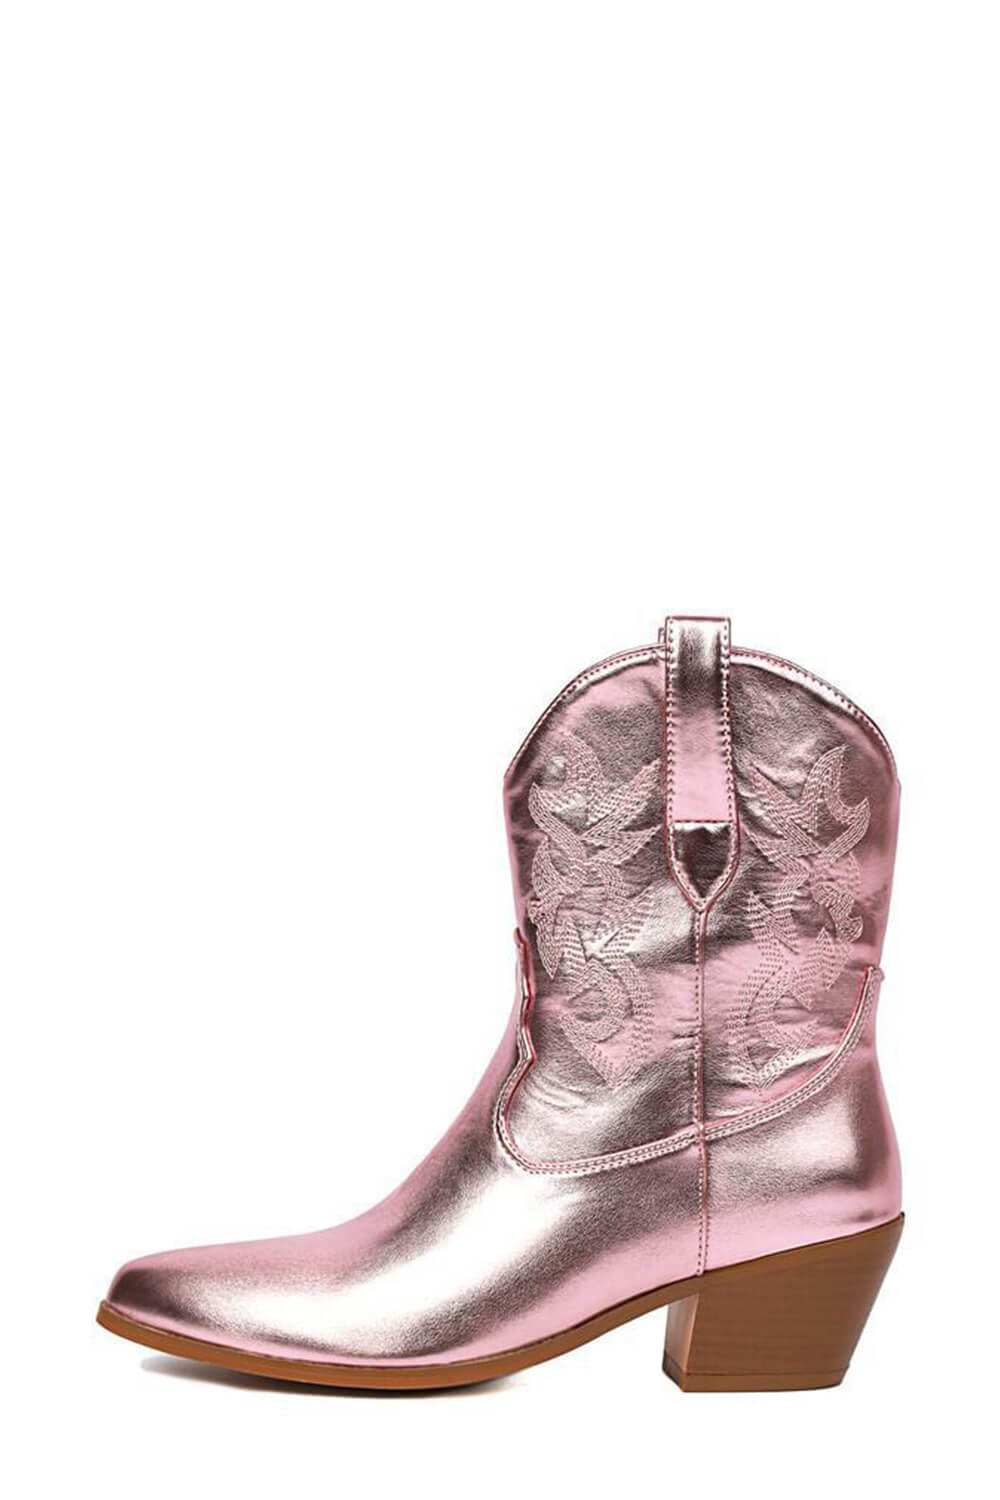 Metallic Western Cowboy Pointed Toe Block Heeled Ankle Boots - Pink